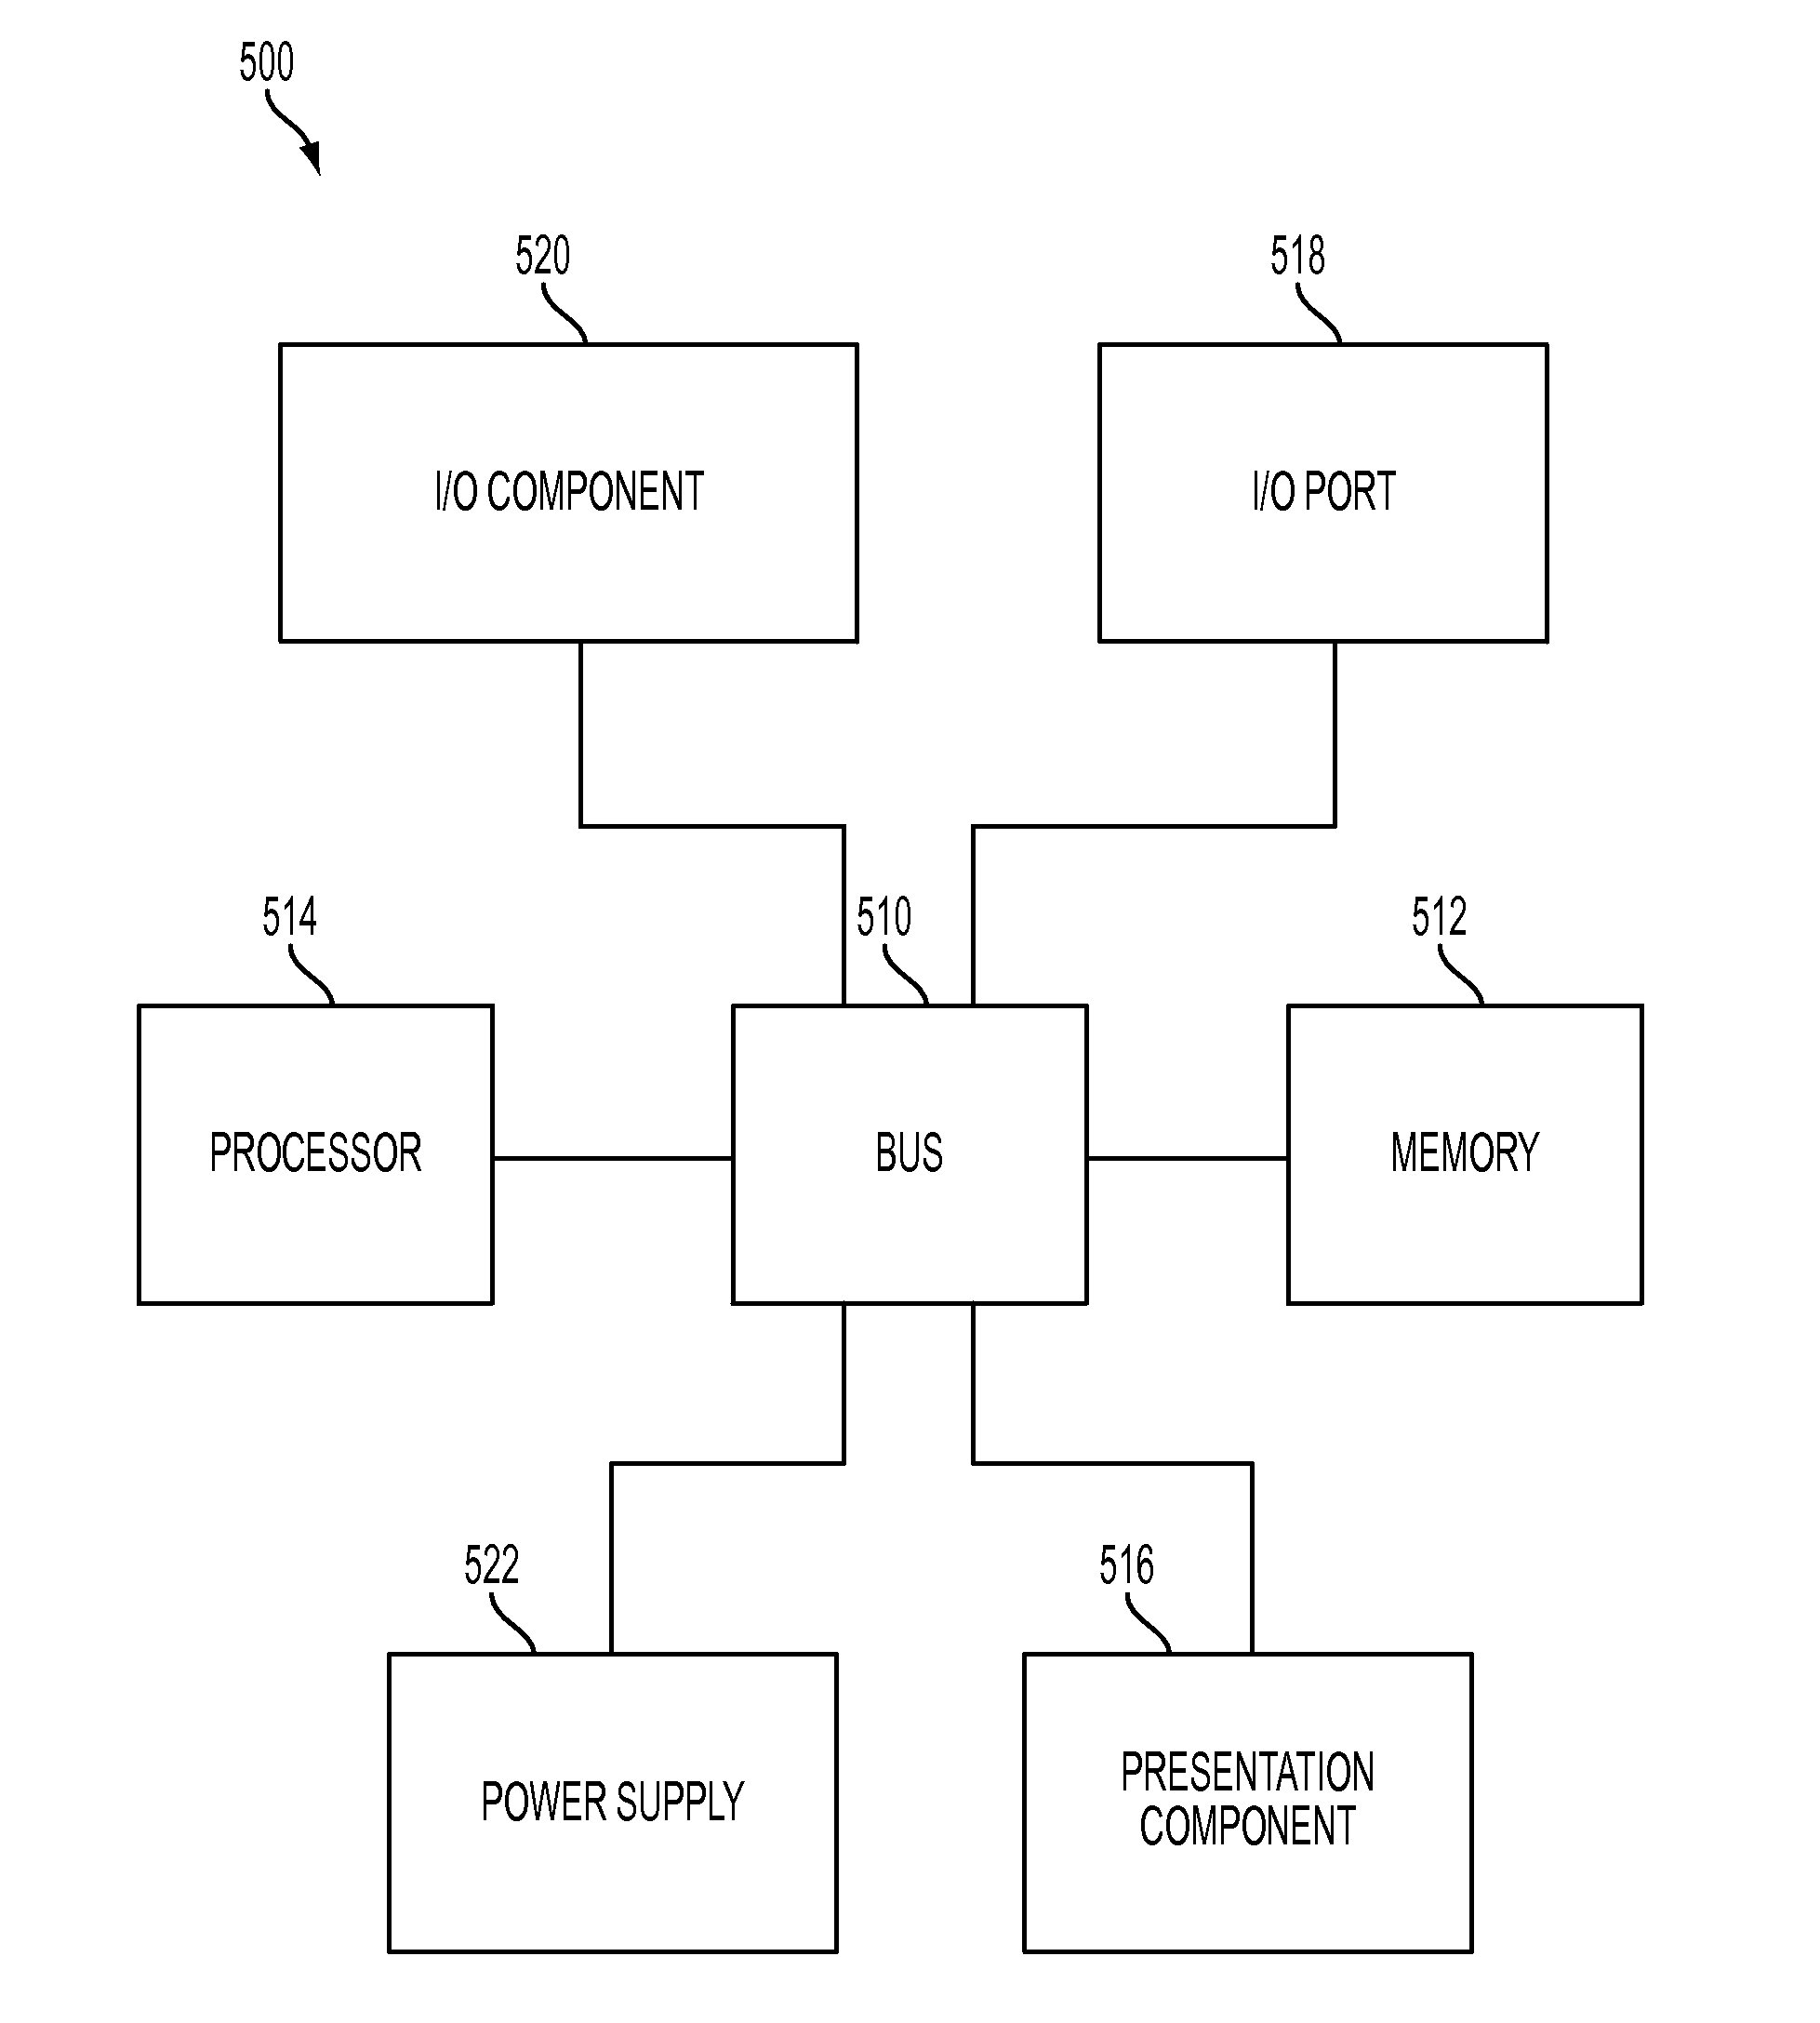 Combination cellular and wi-fi hardware device